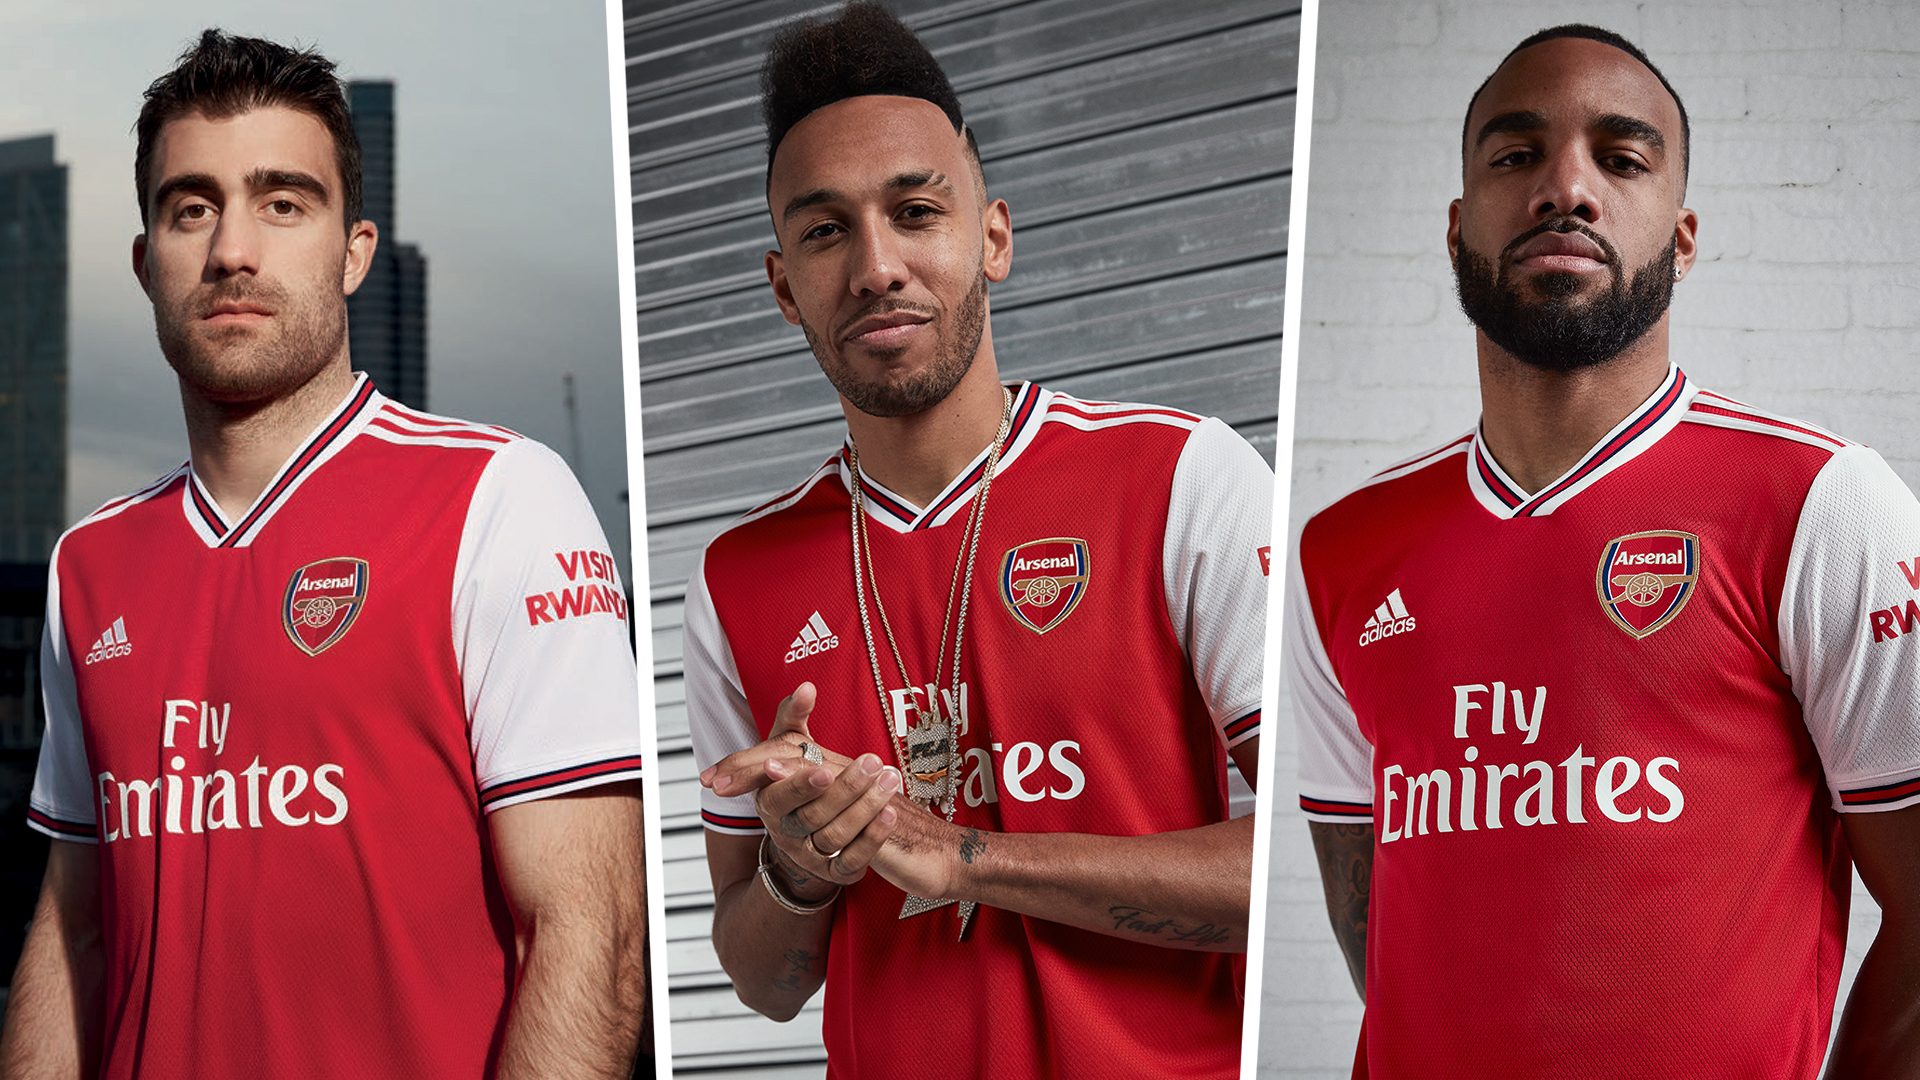  Arsenal 2019 20 Kit Dream League Soccer 2020 Time and 